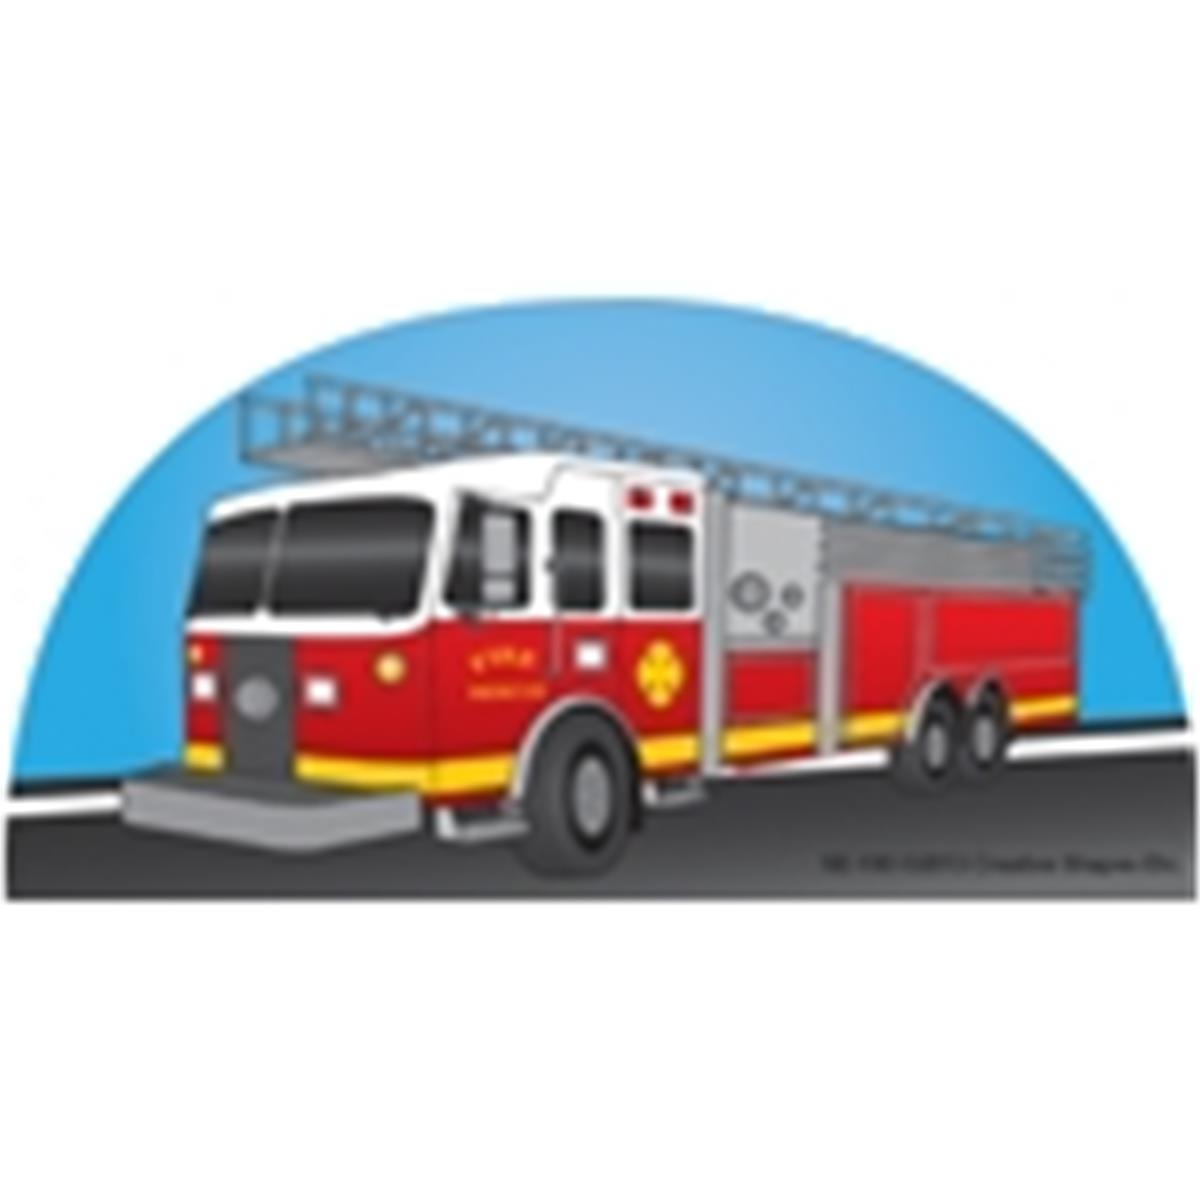 Se-0193 9 X 6 In. Large Notepad, Fire Truck - 50 Sheets Per Pack